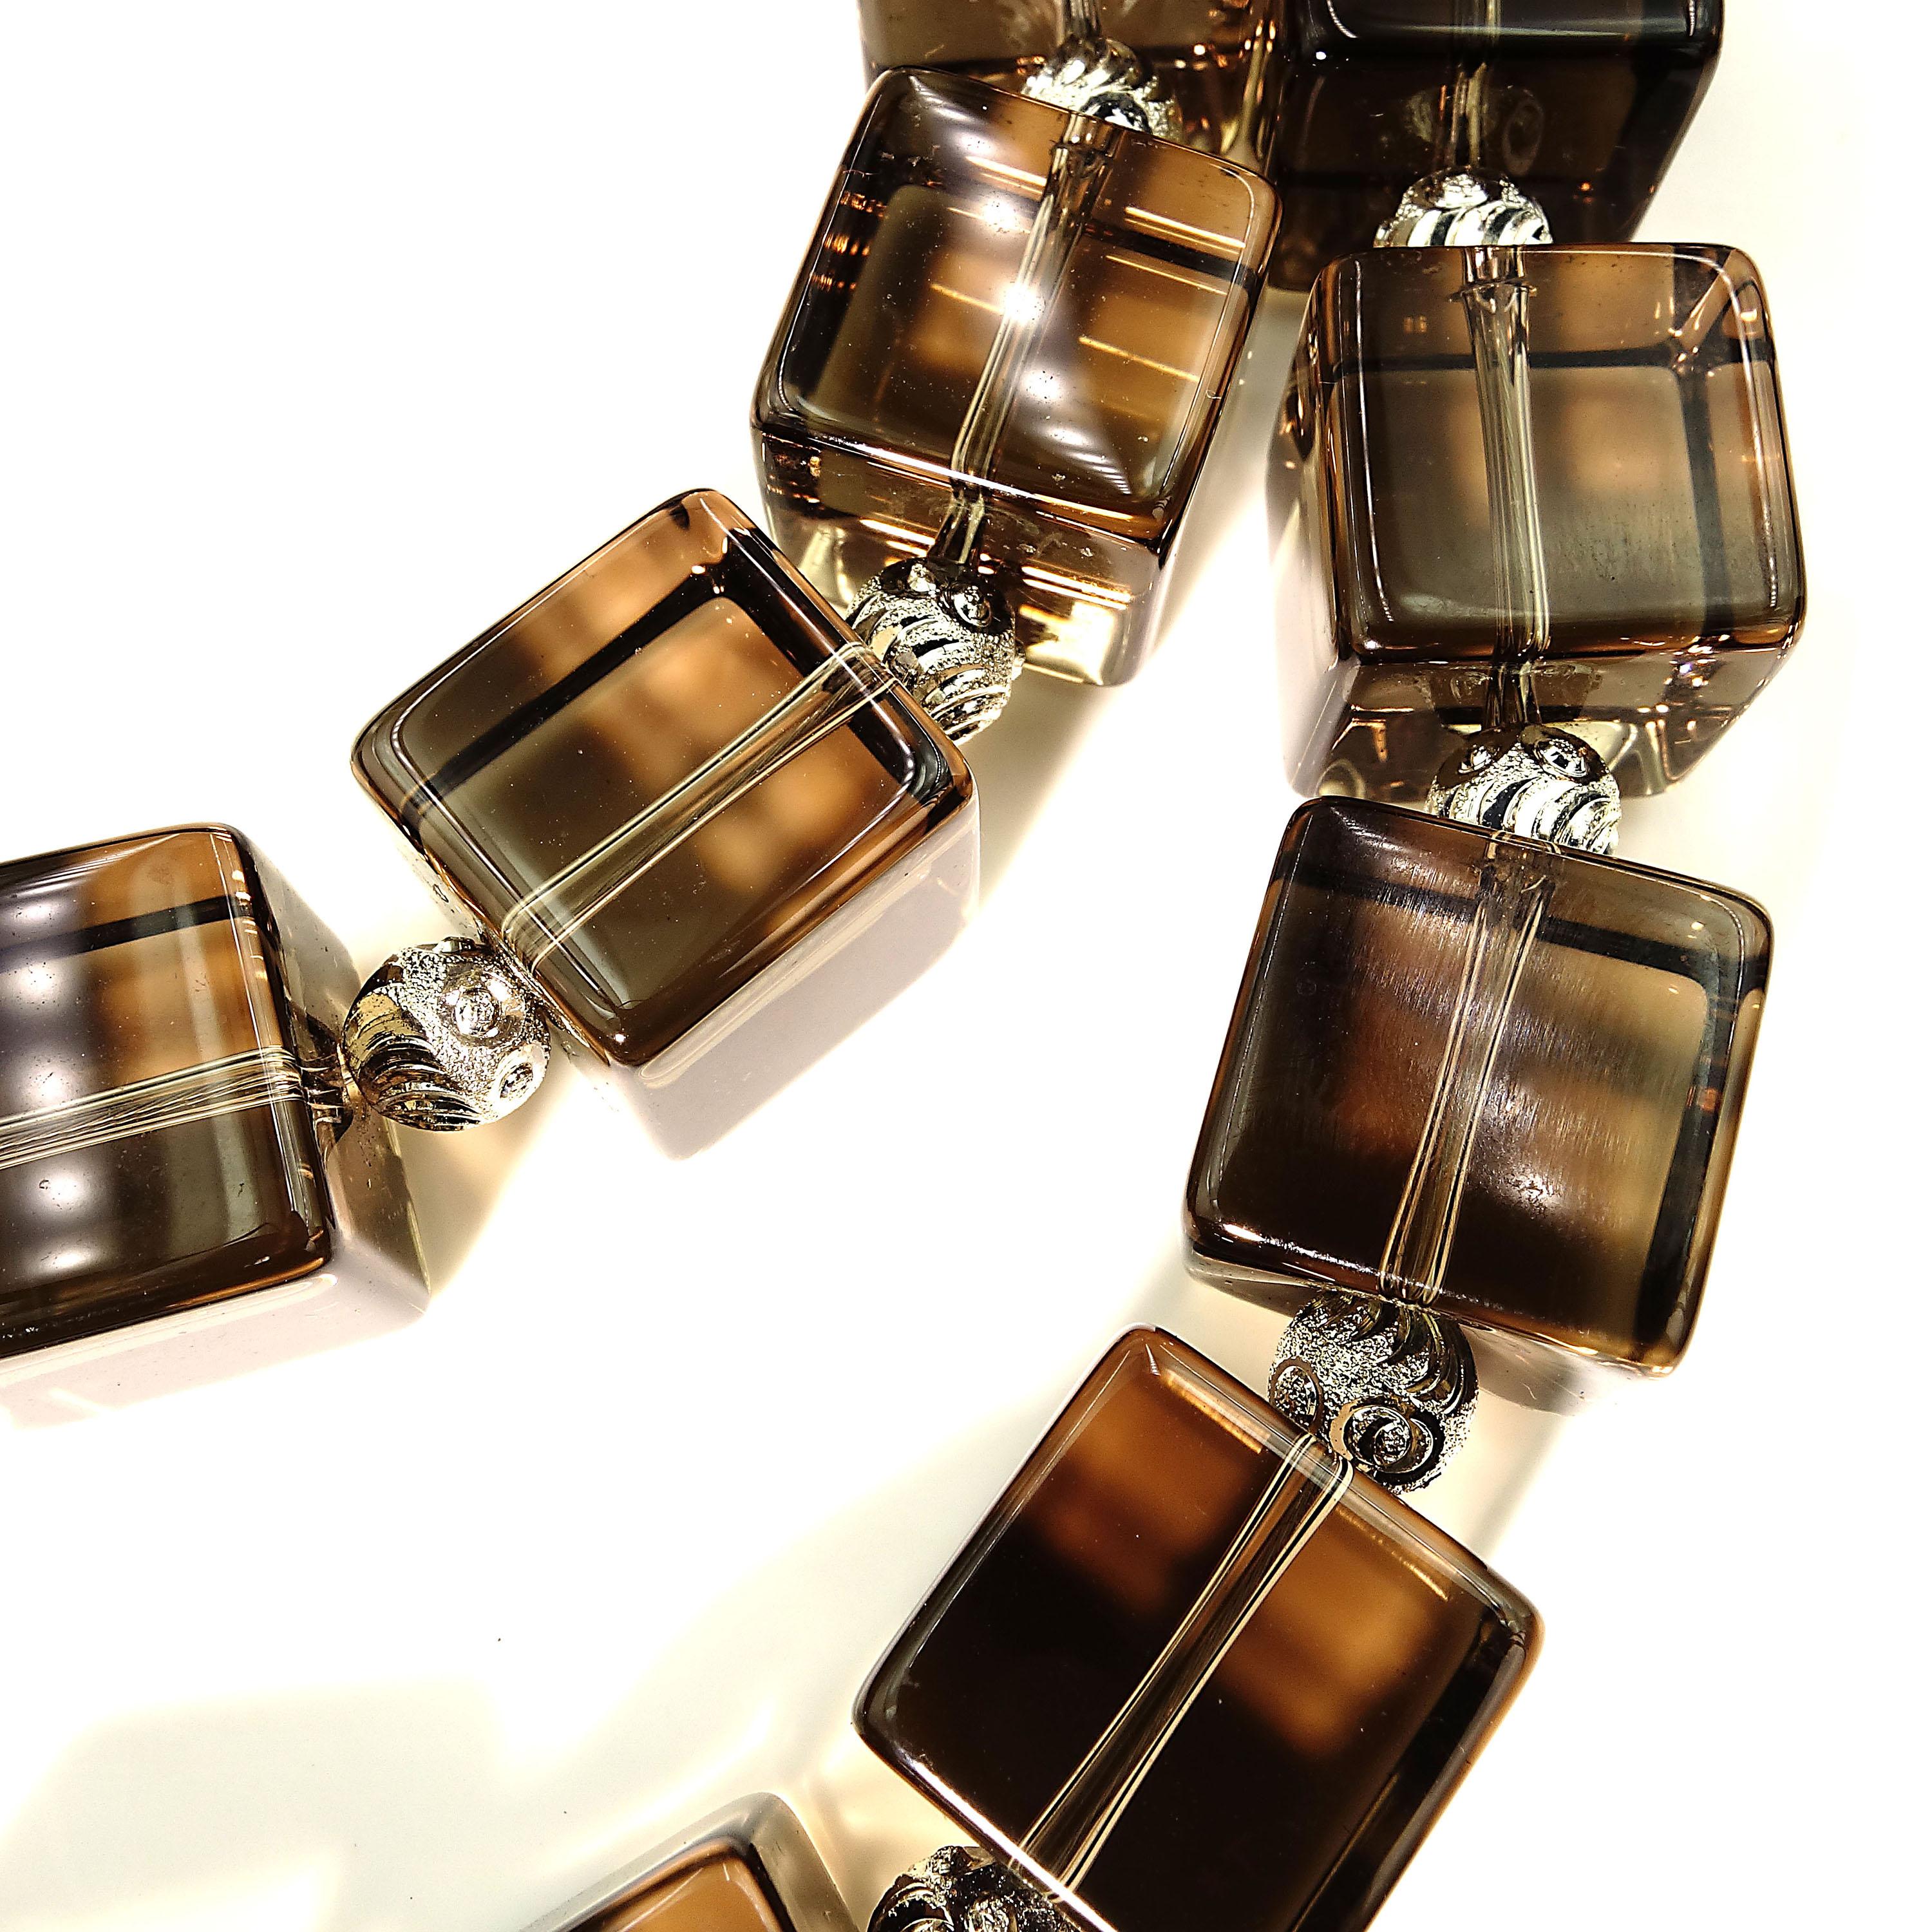 This is a Statement Necklace of Glowing, Clean Cubes (14x14mm) of Smoky Quartz enhanced with etched silver tone spacers (6mm).  The clasp is also silver tone with complementary druzy inset.  The Smoky Quartz is extraordinary, it is so clean and